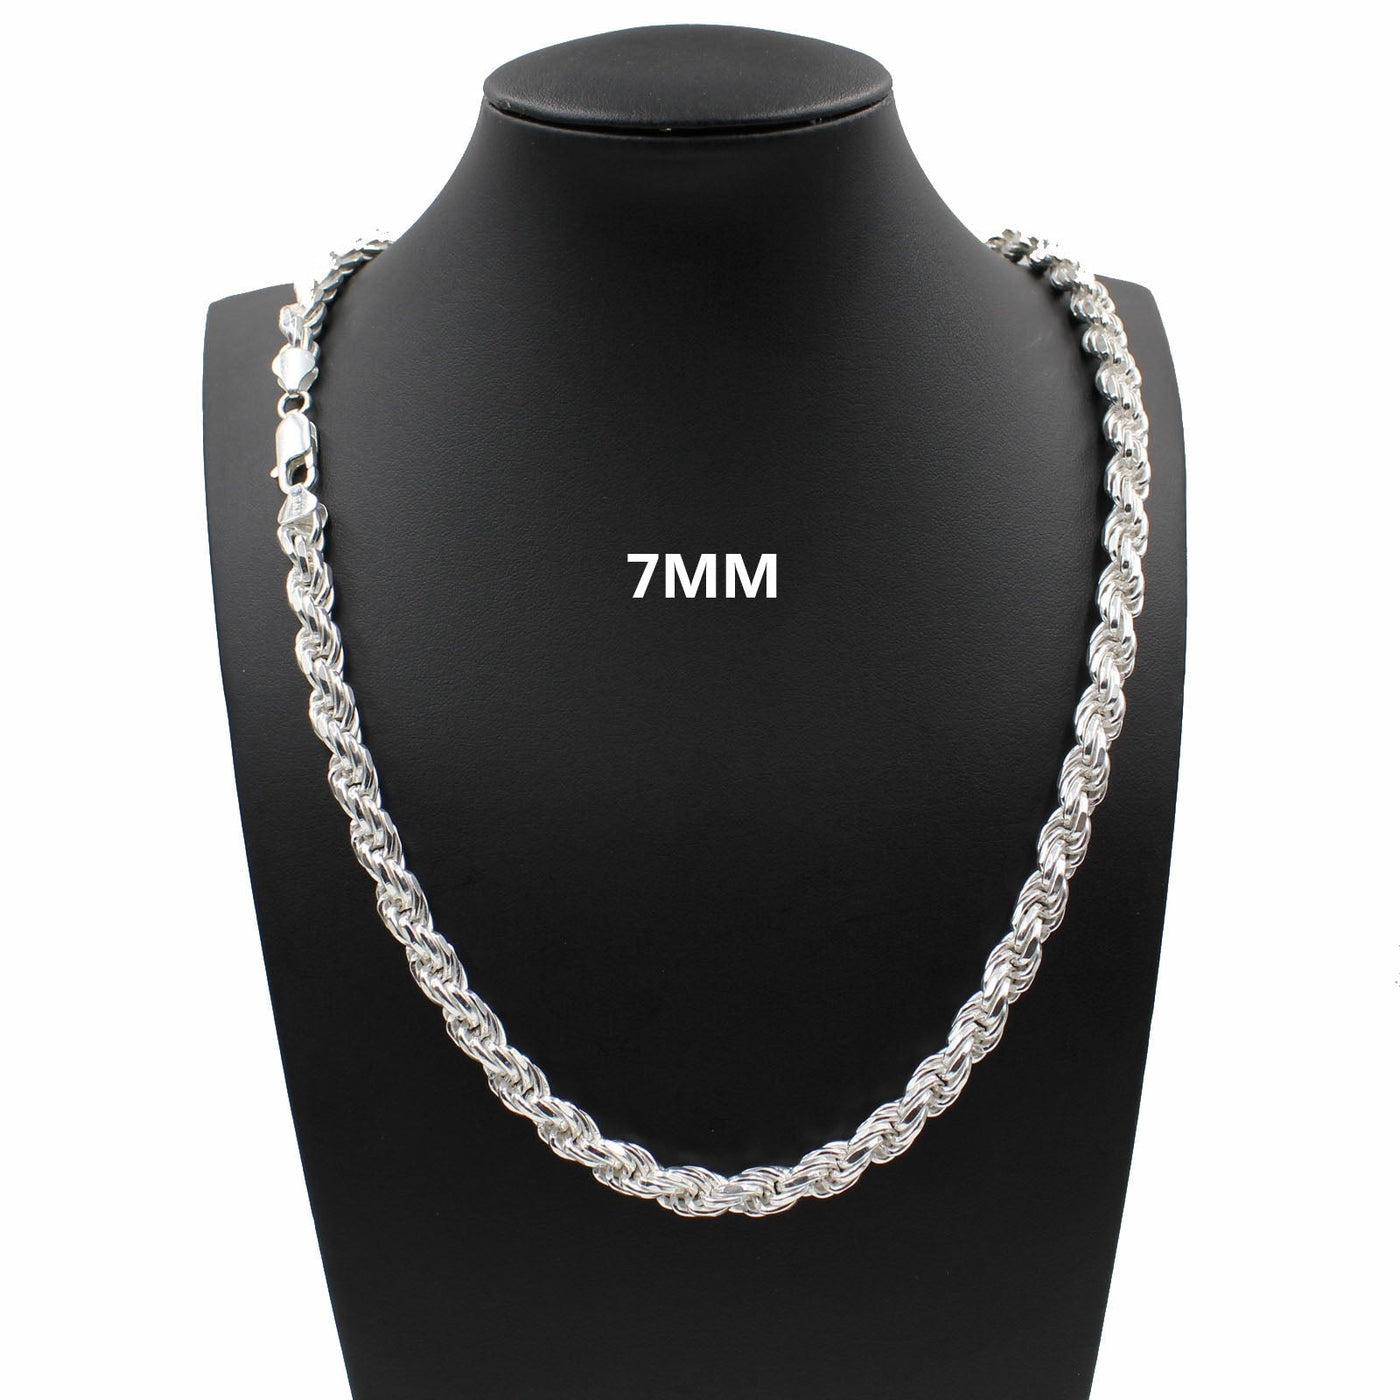 7MM Solid 925 Sterling Silver Diamond-Cut Rope Chain Necklace or Bracelet ITALY